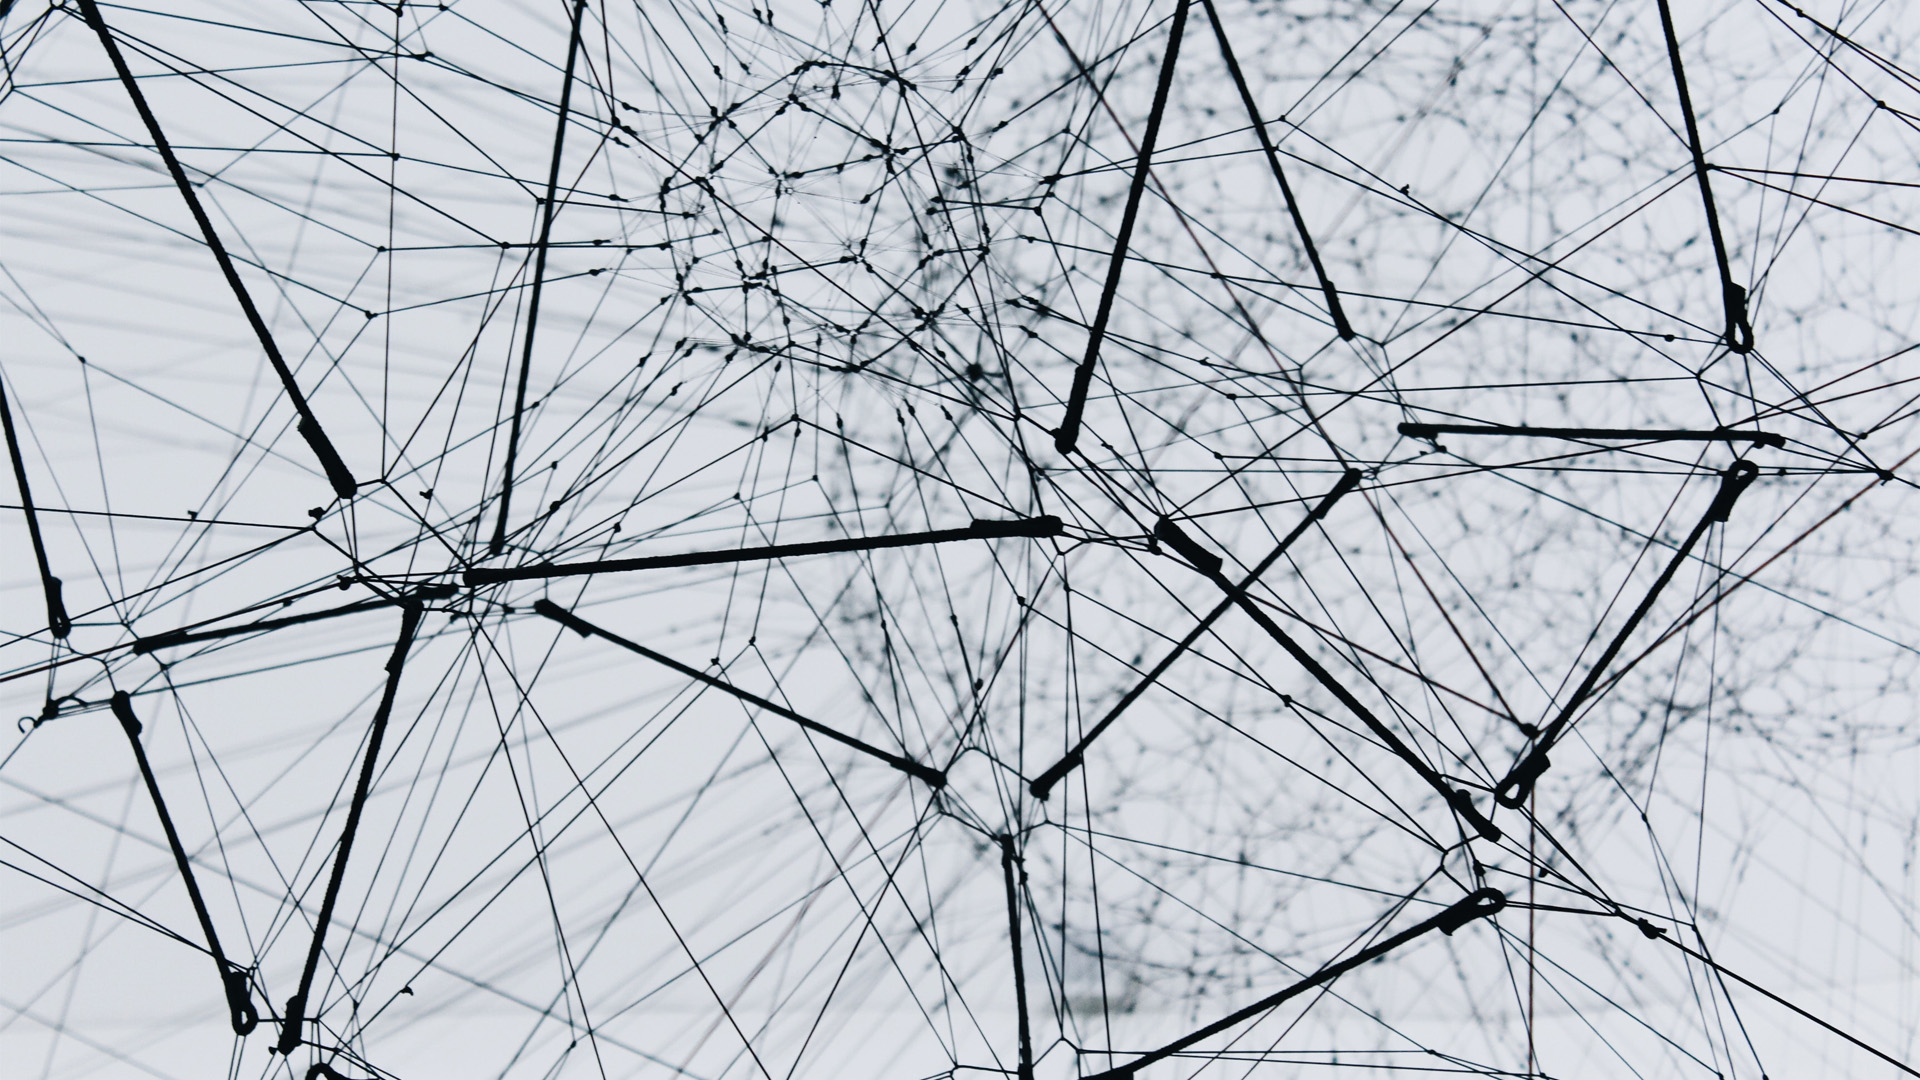 decorative: image of an interconnected web of lines, symbolising the supply chain